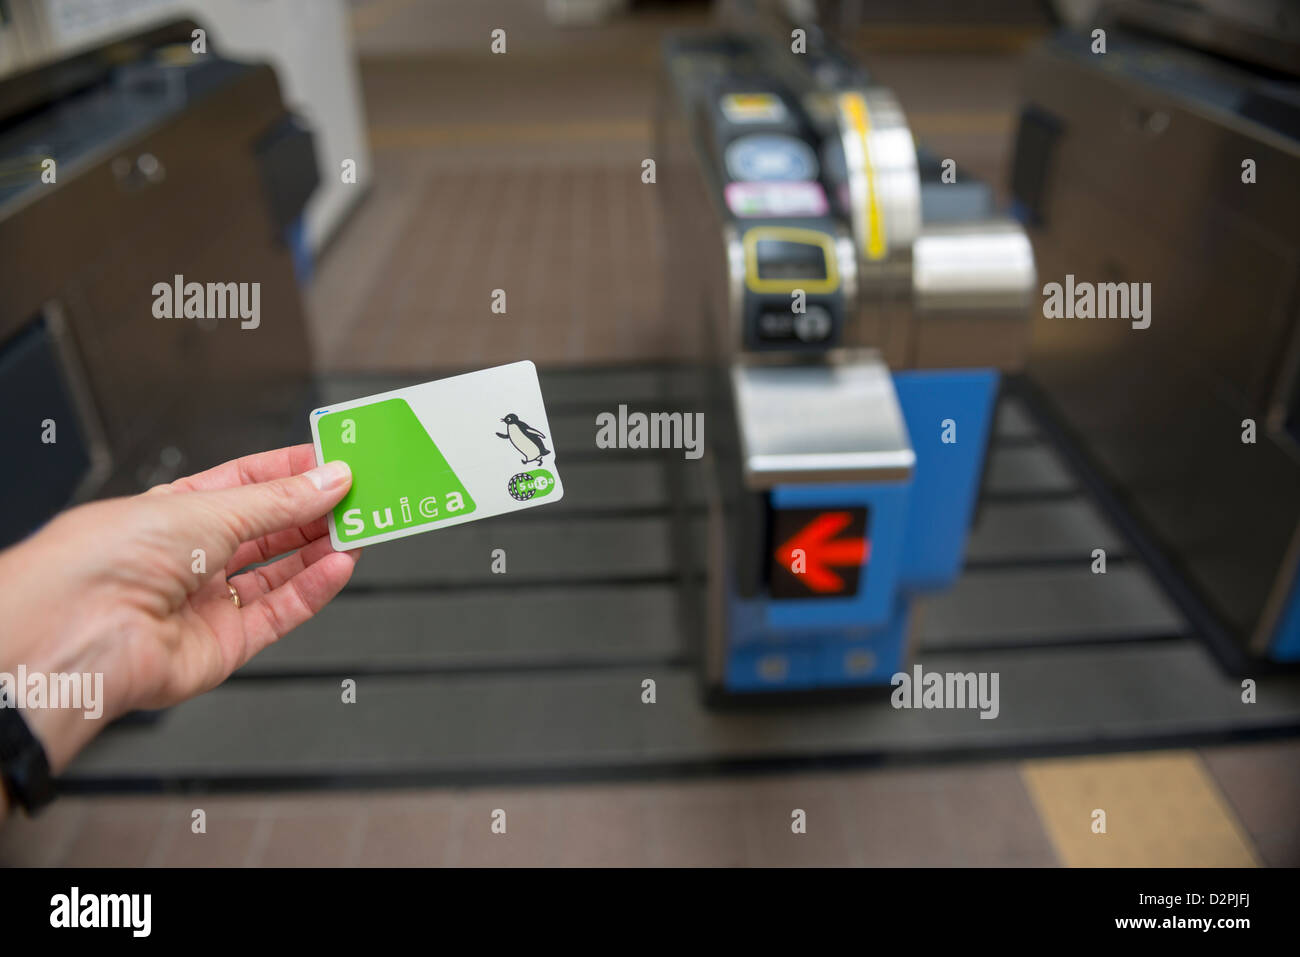 Stored value card Suica in front of a train entrance gate in Tokyo Japan Stock Photo